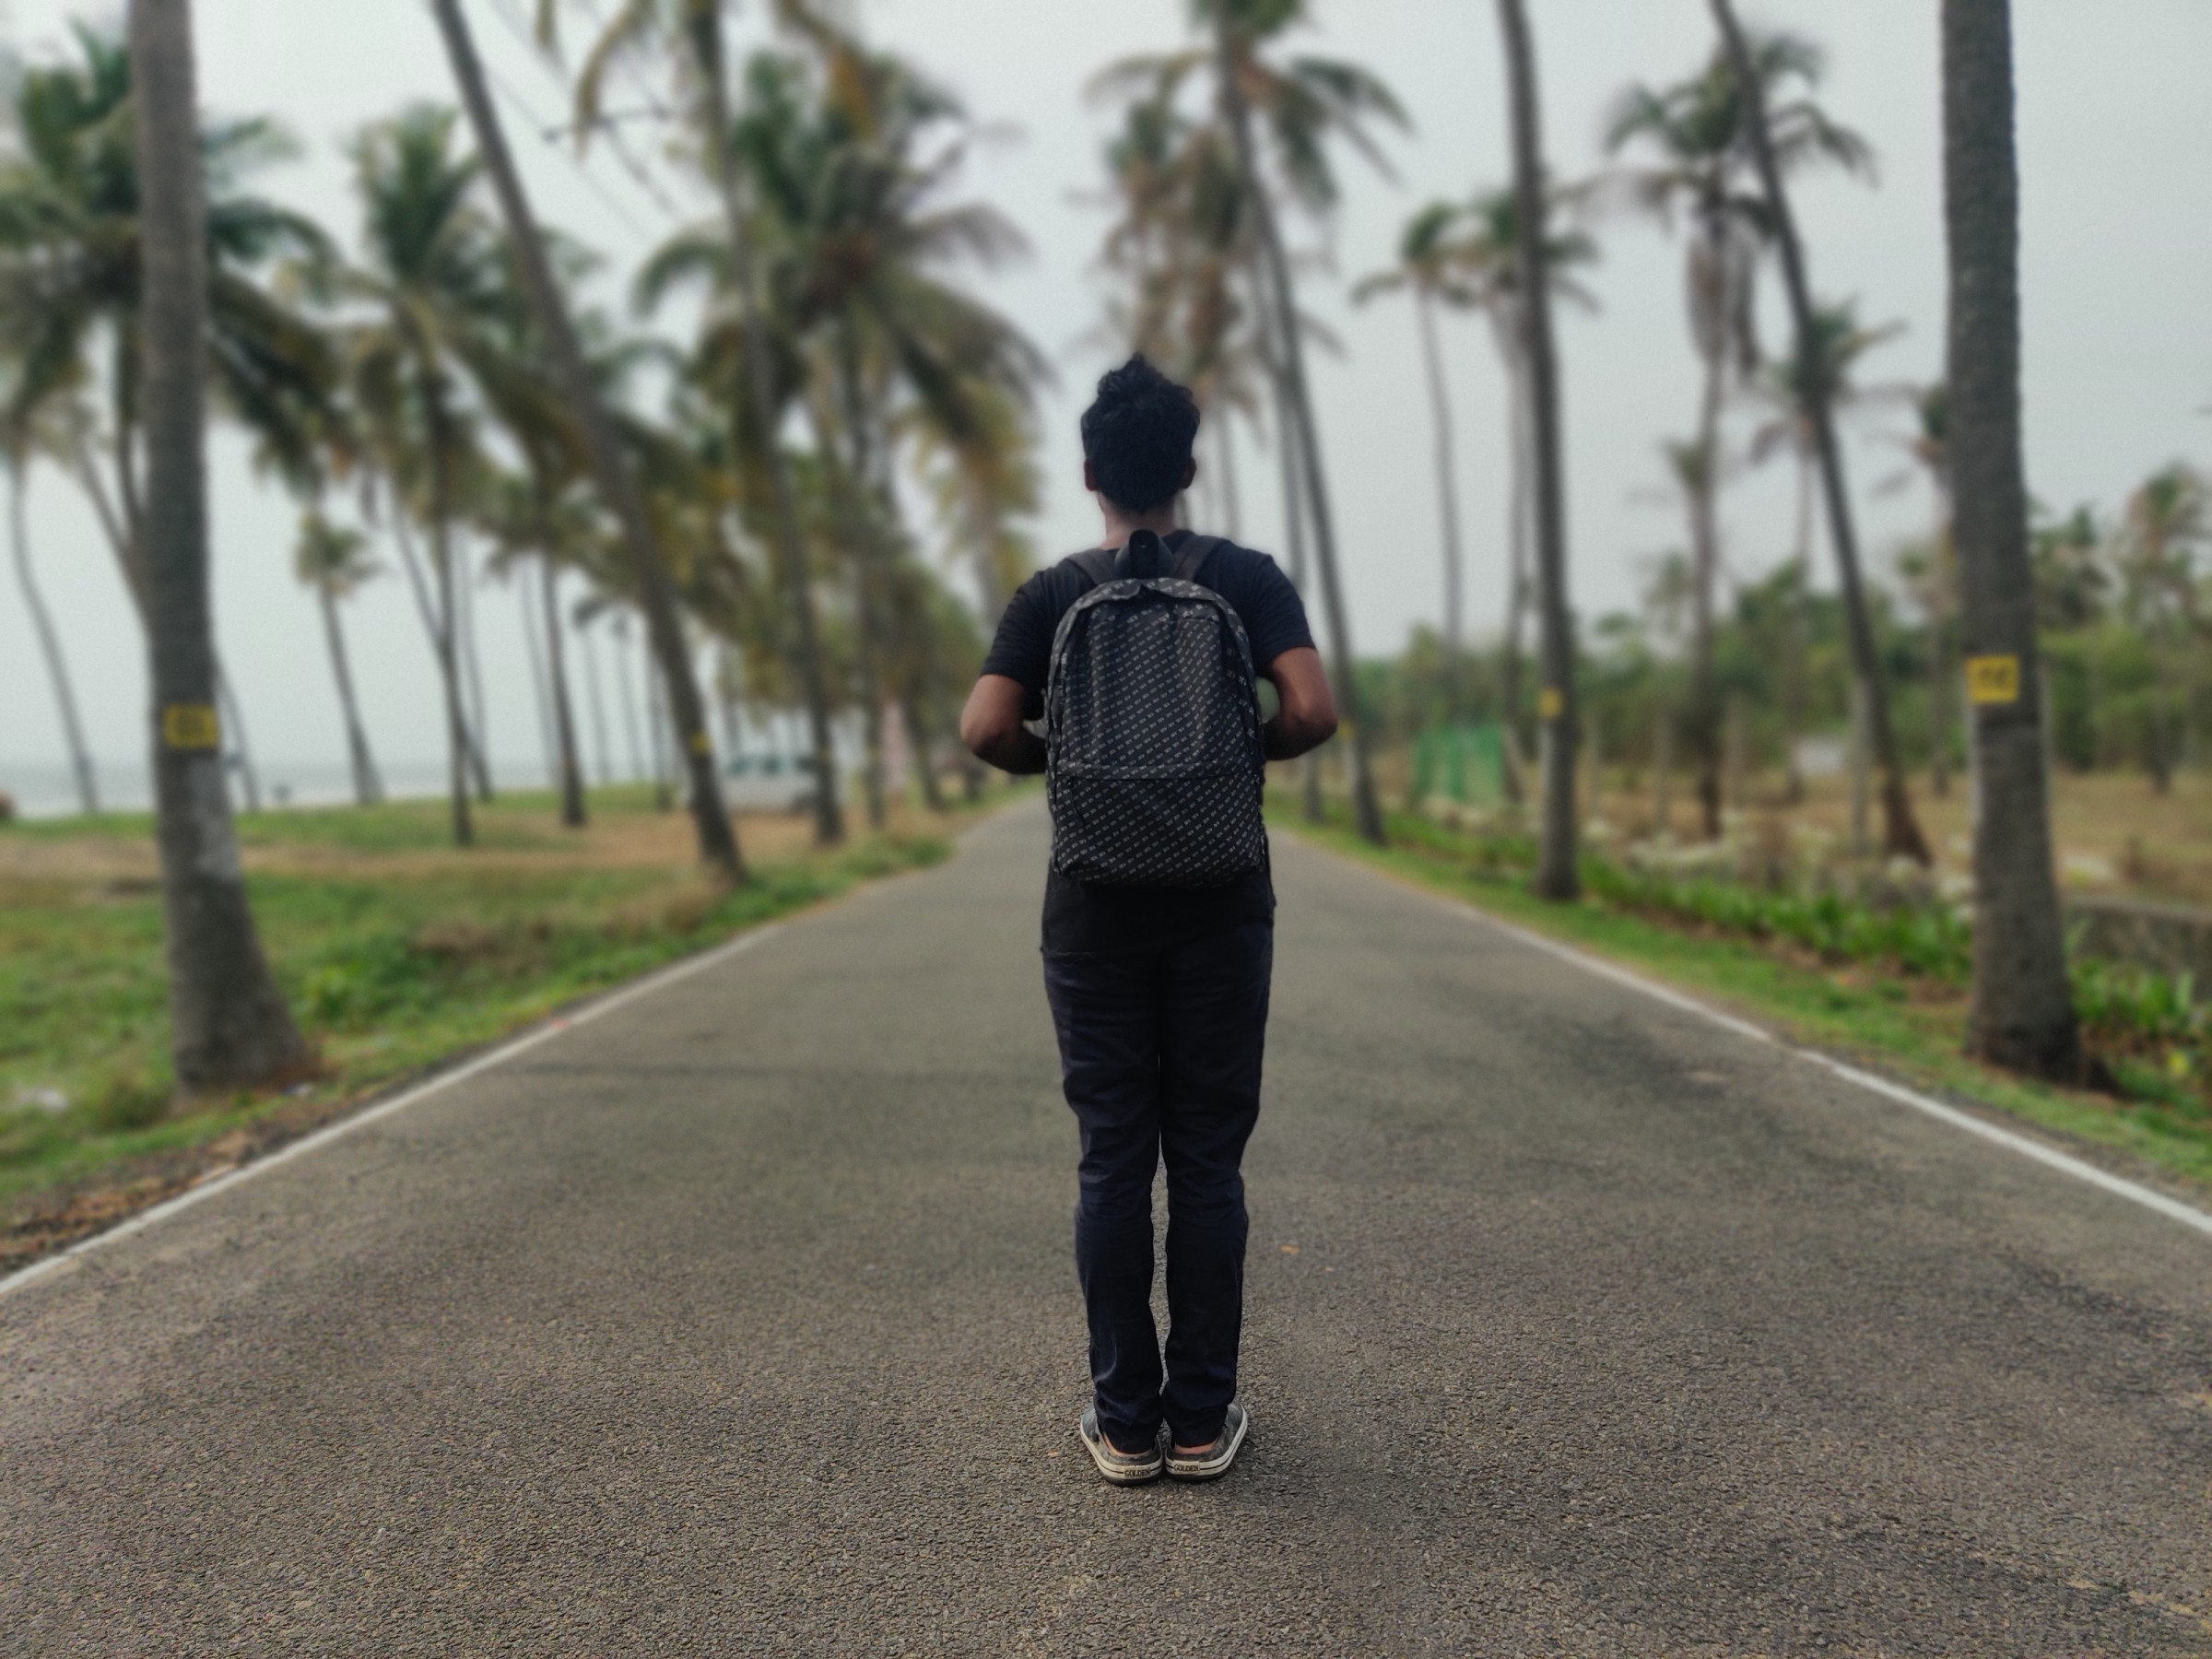 Author Liyas walking away down a palm tree–lined path